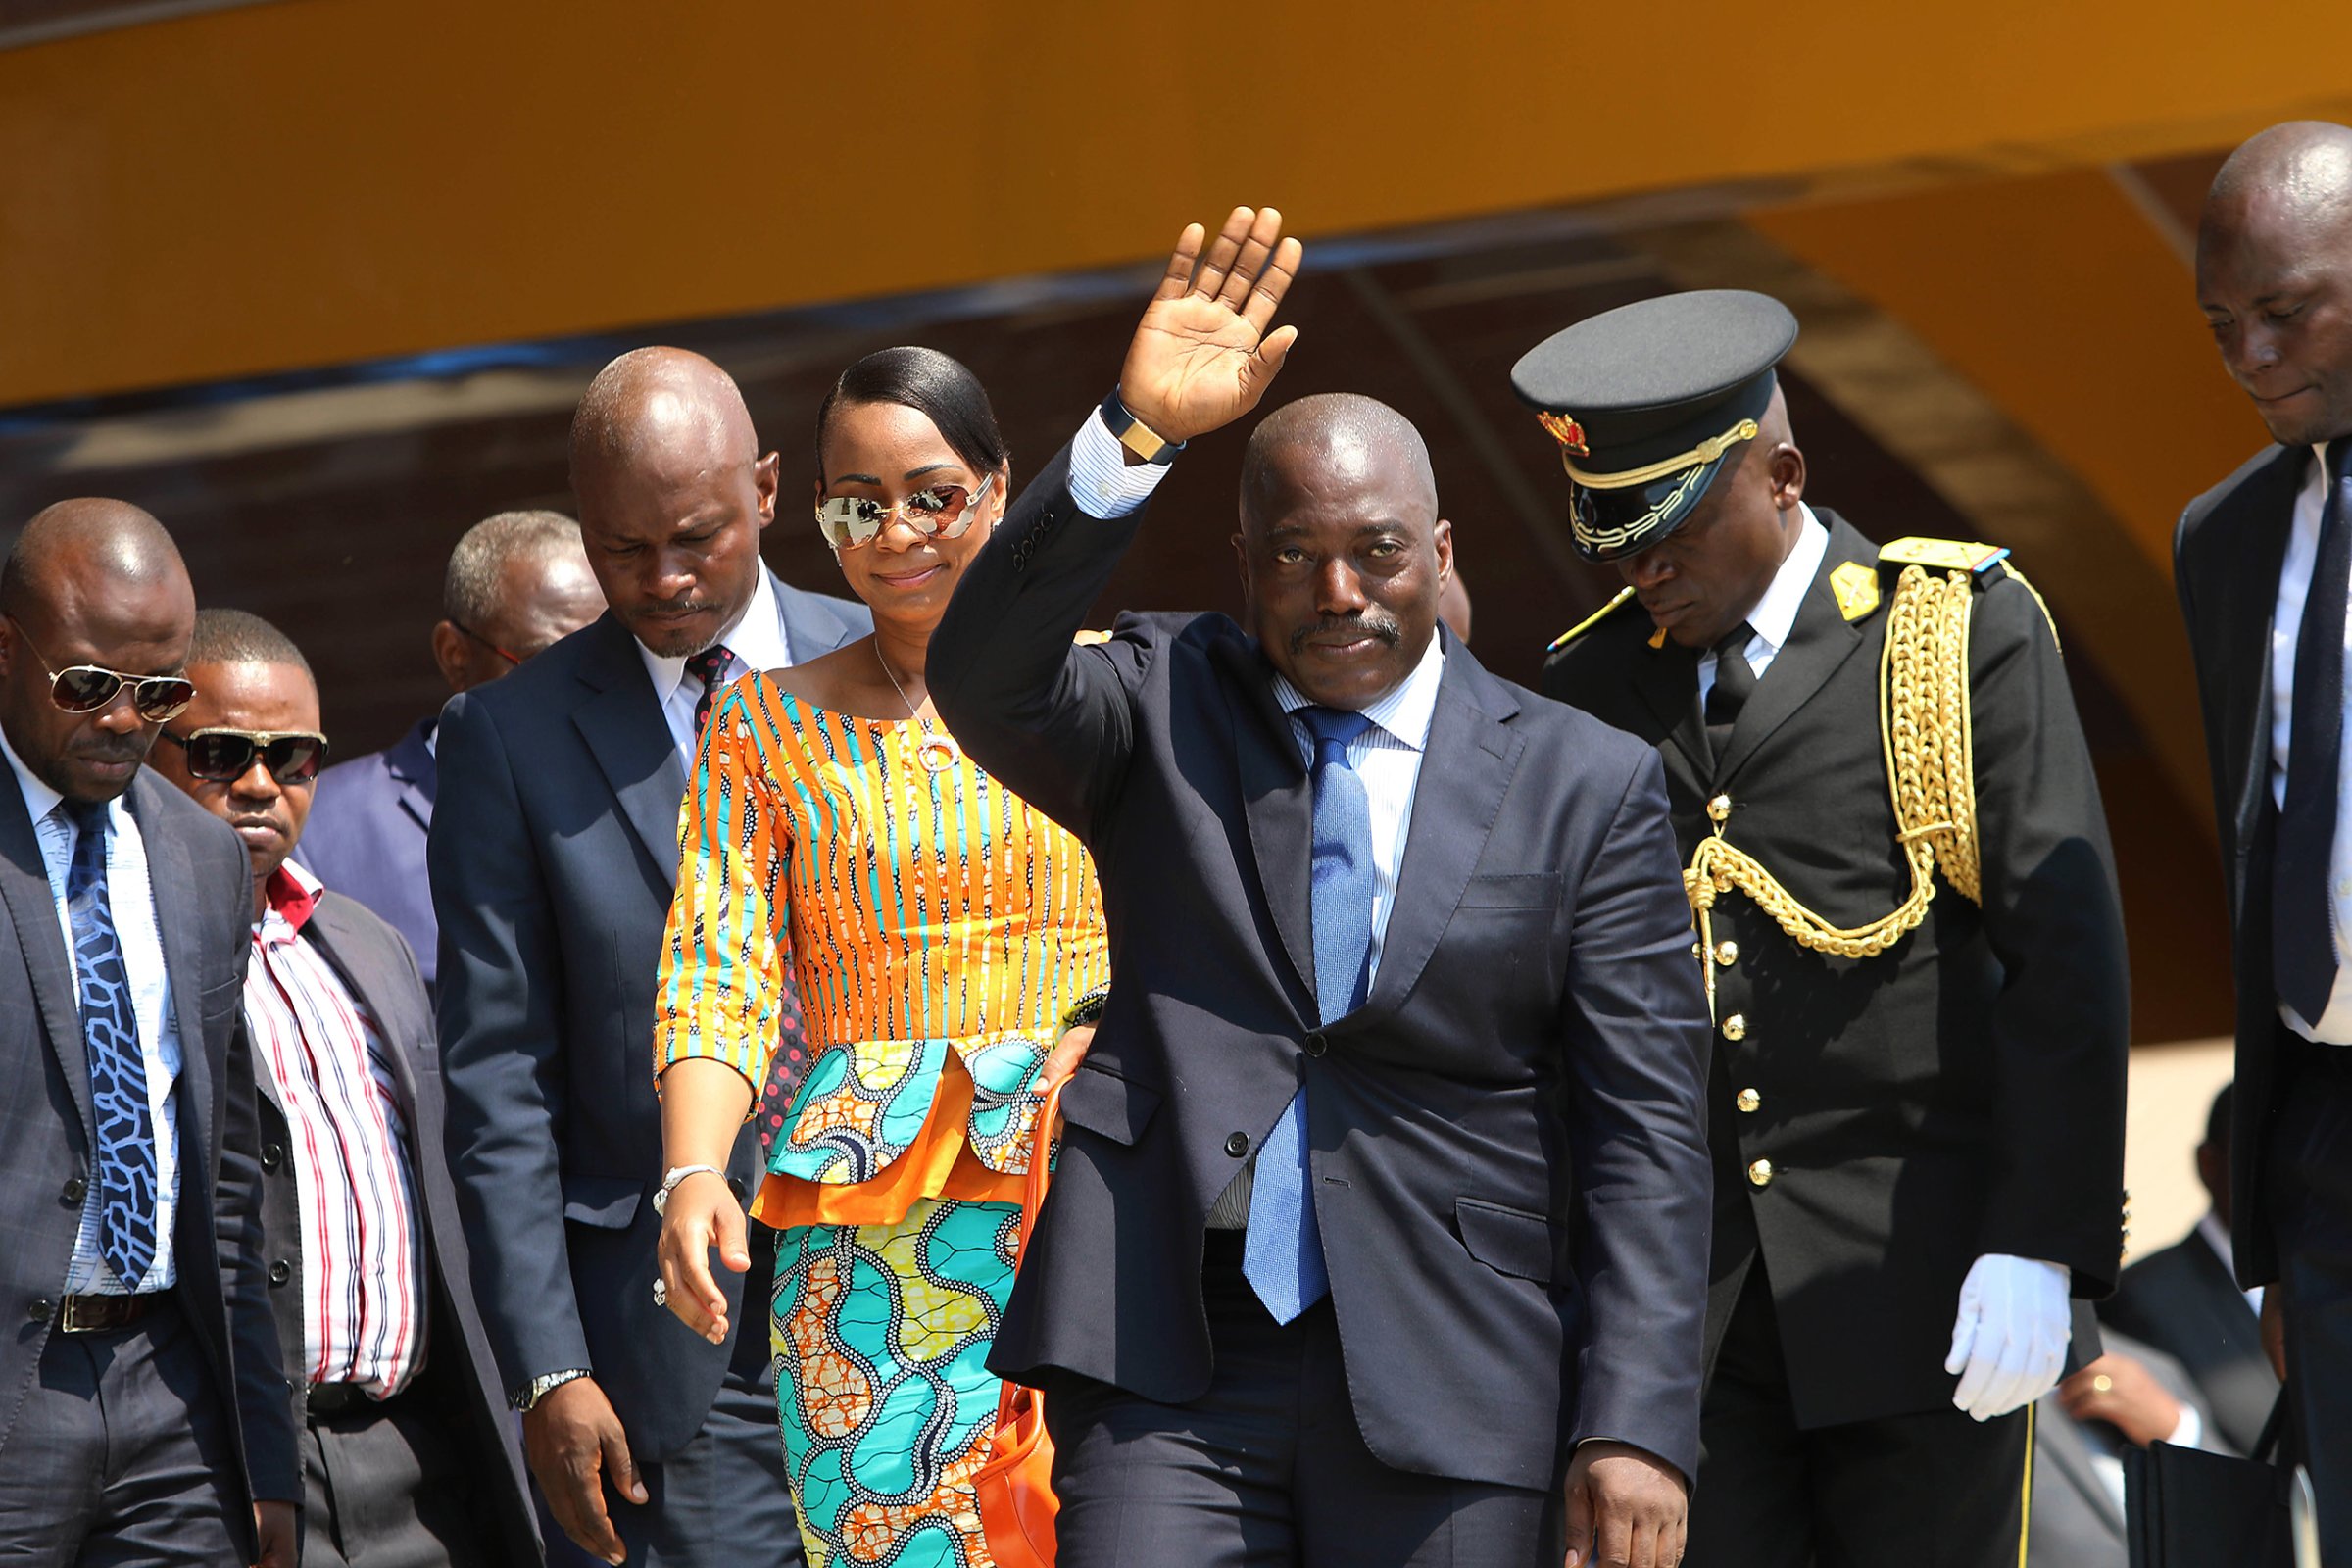 Congolese President Joseph Kabila waves as he and others celebrate the Democratic Republic of Congo, DRC, independence in Kindu, Congo on June 30, 2016.